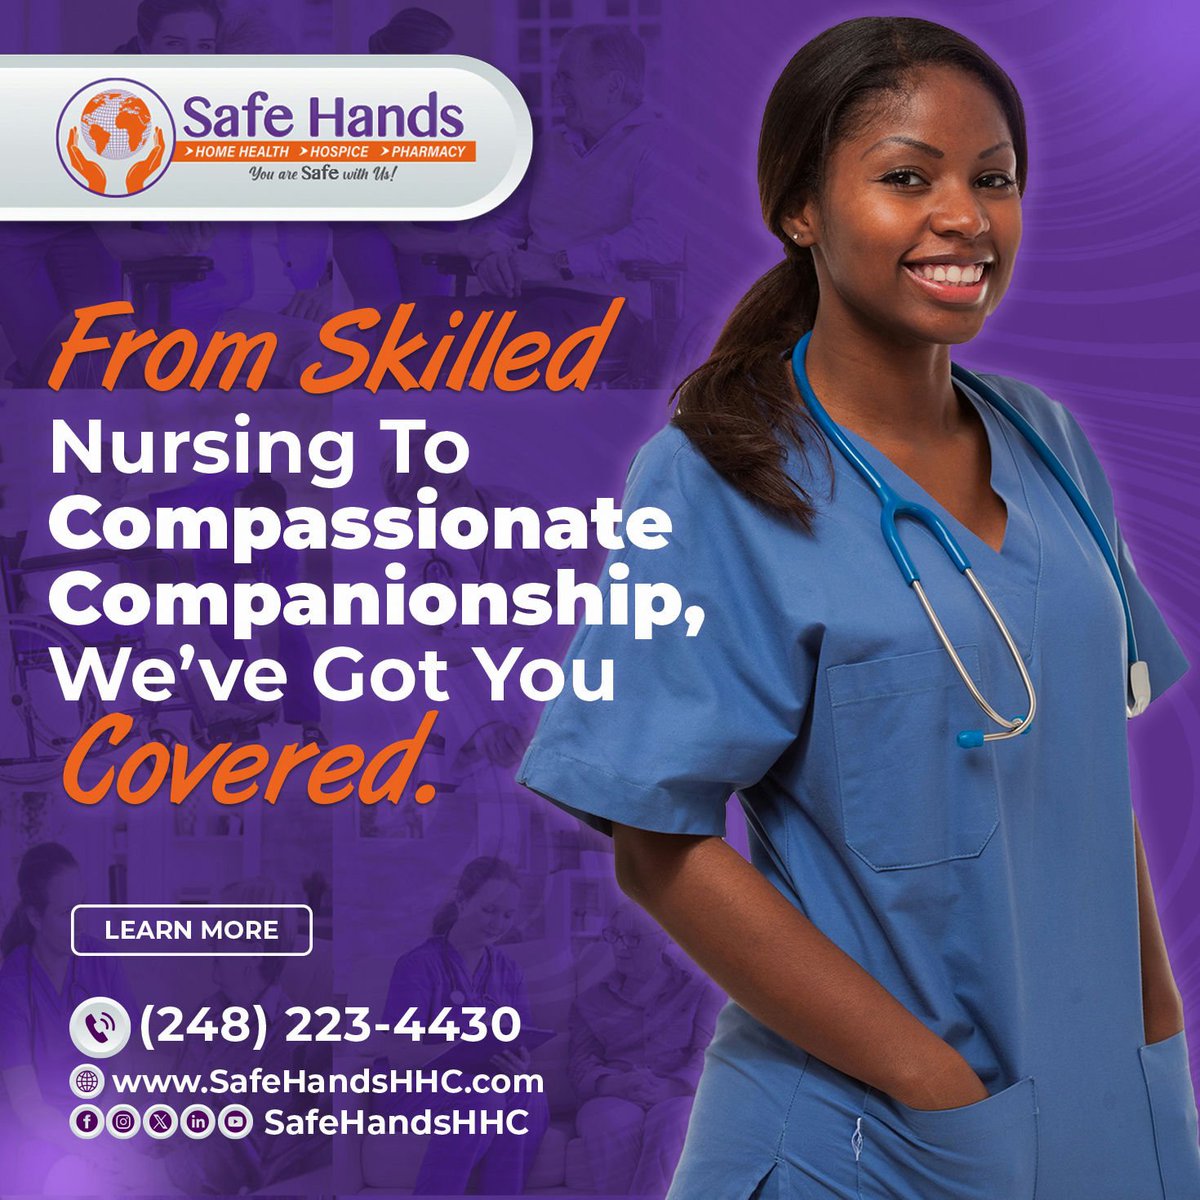 From the first aid to the friendly aid, our skilled nurses and compassionate caregivers ensure every aspect of your health is well looked after. Trust Safe Hands to care as much as you do.

Feel free to contact us now: +1 (248) 223-4430
or
Visit us: safehandshhc.com

#Safe